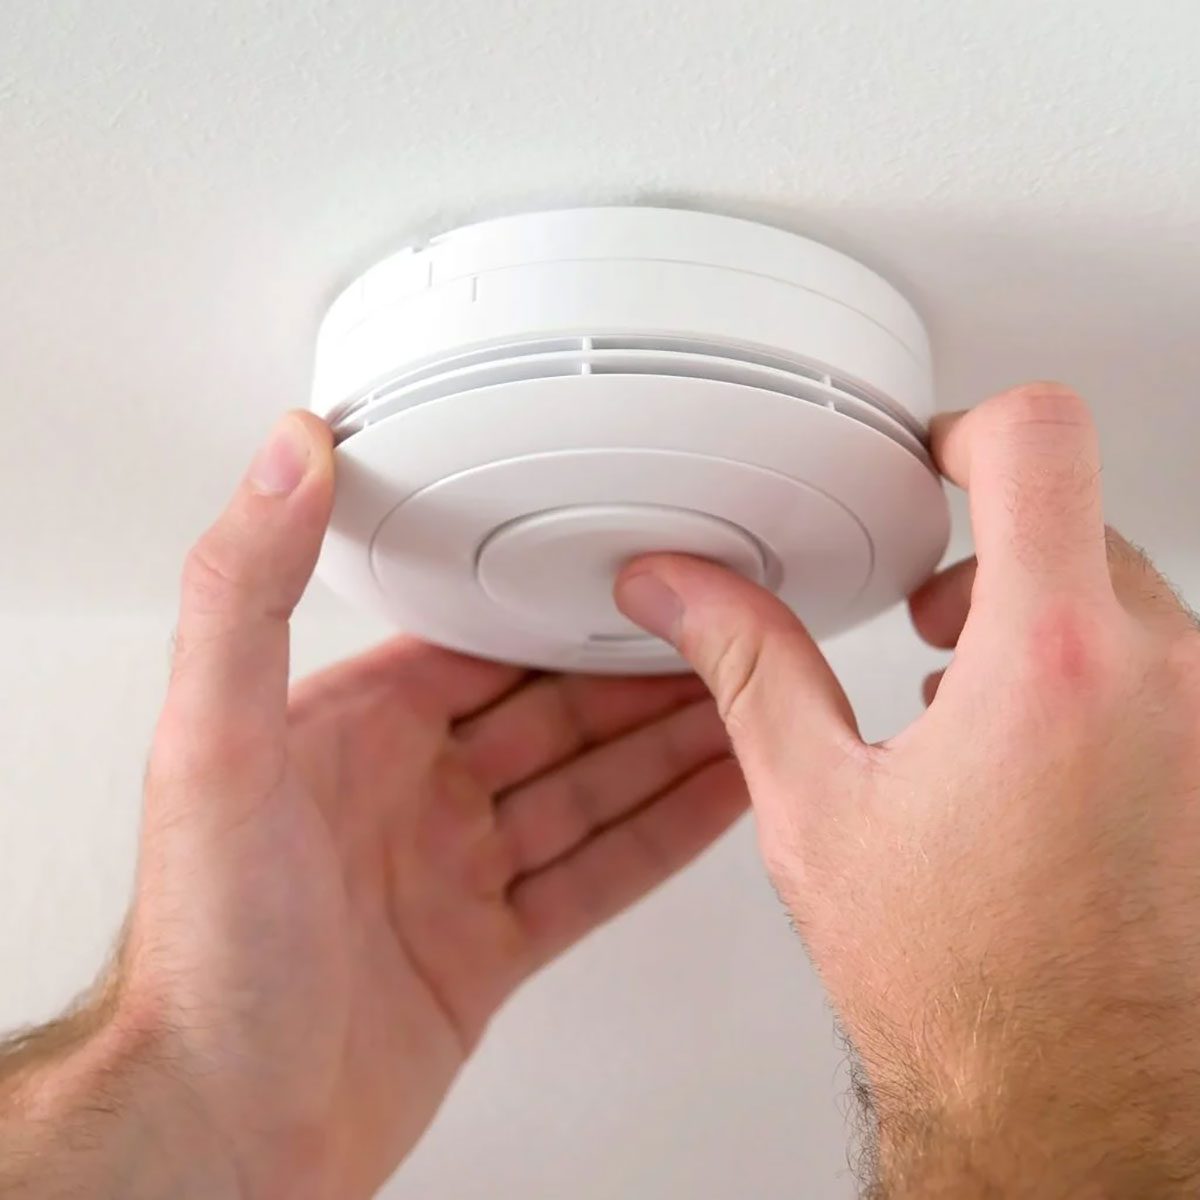 ▷ Types of Fire Detectors · How they work · Classes and models ▷